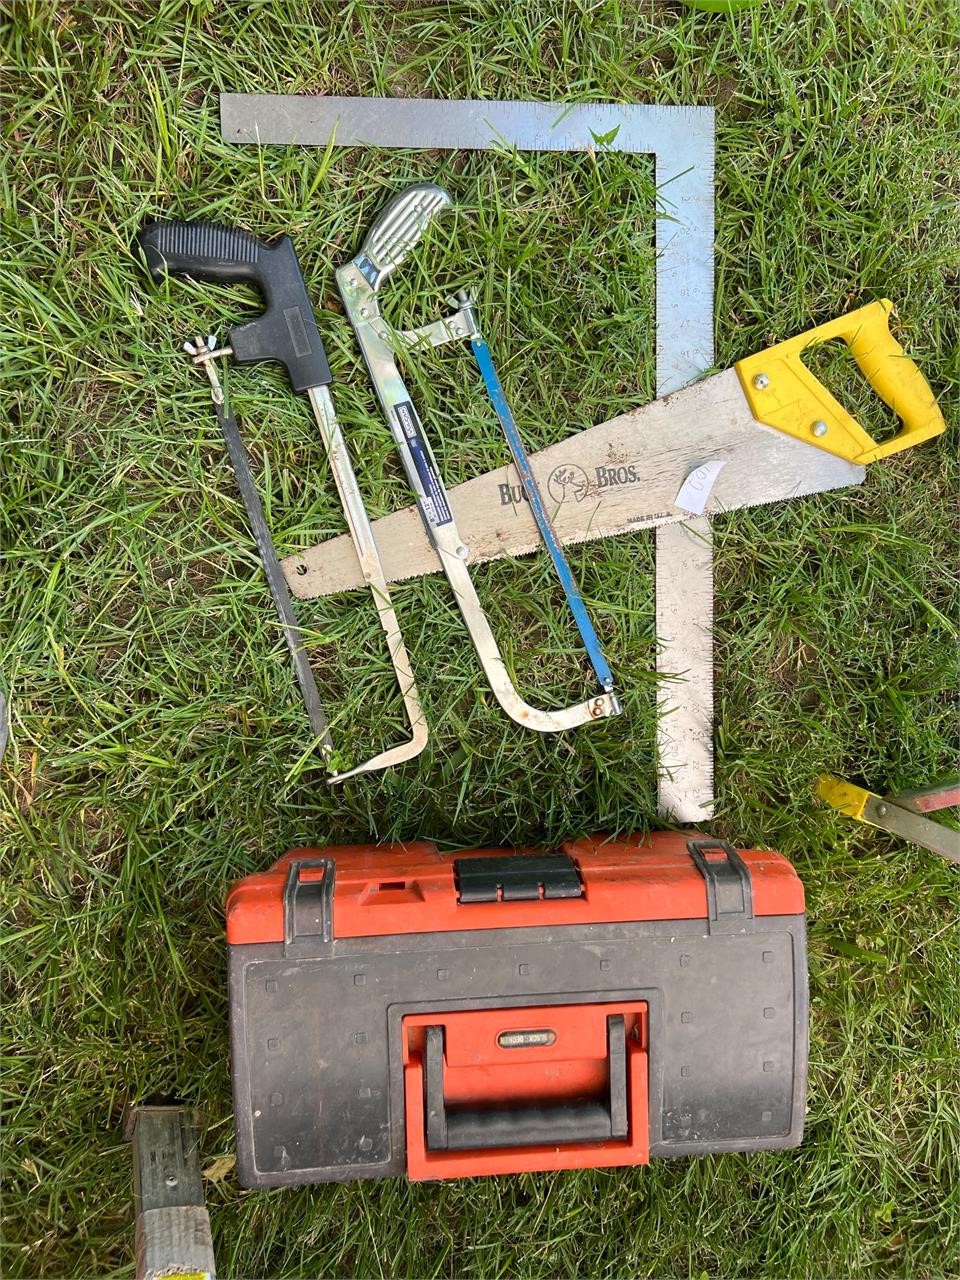 NEW & USED TOOLS & FISHING ITEMS